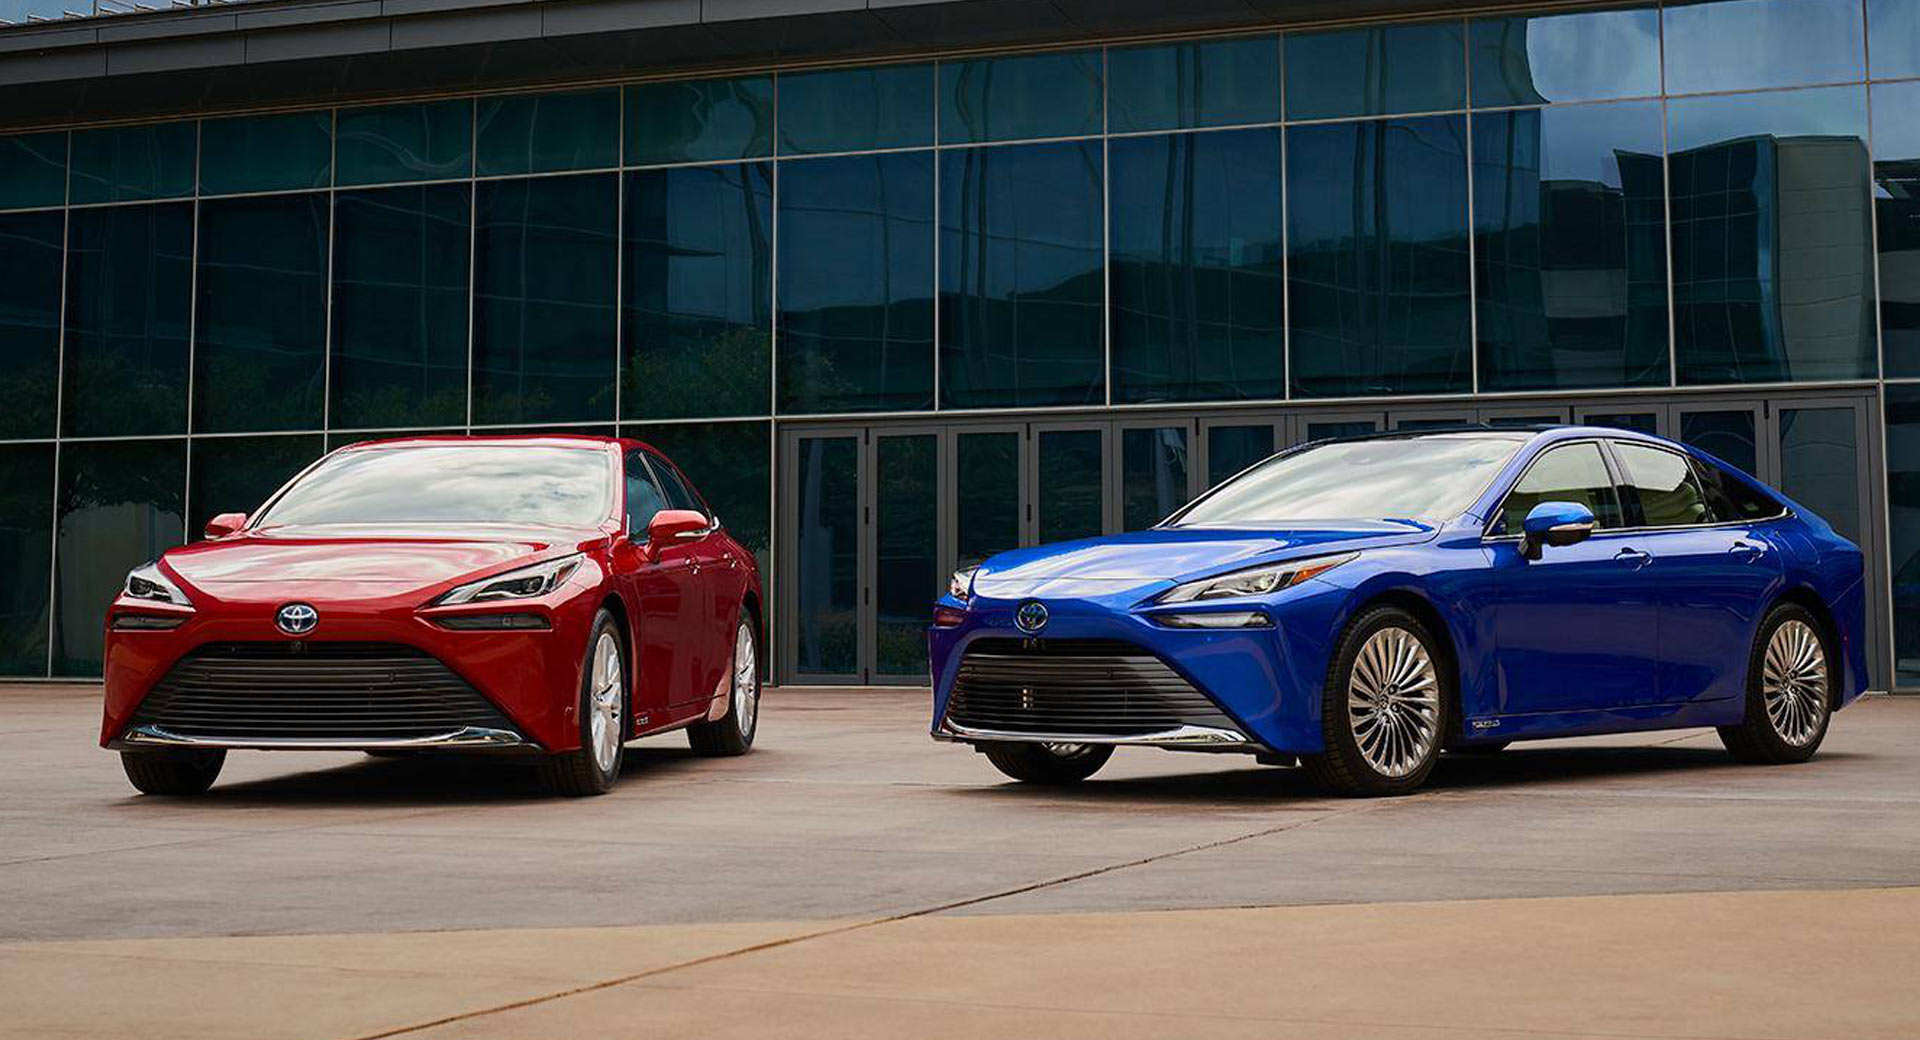 2021 Toyota Mirai FCV Revealed, Features Rear-Wheel Drive And 180 HP